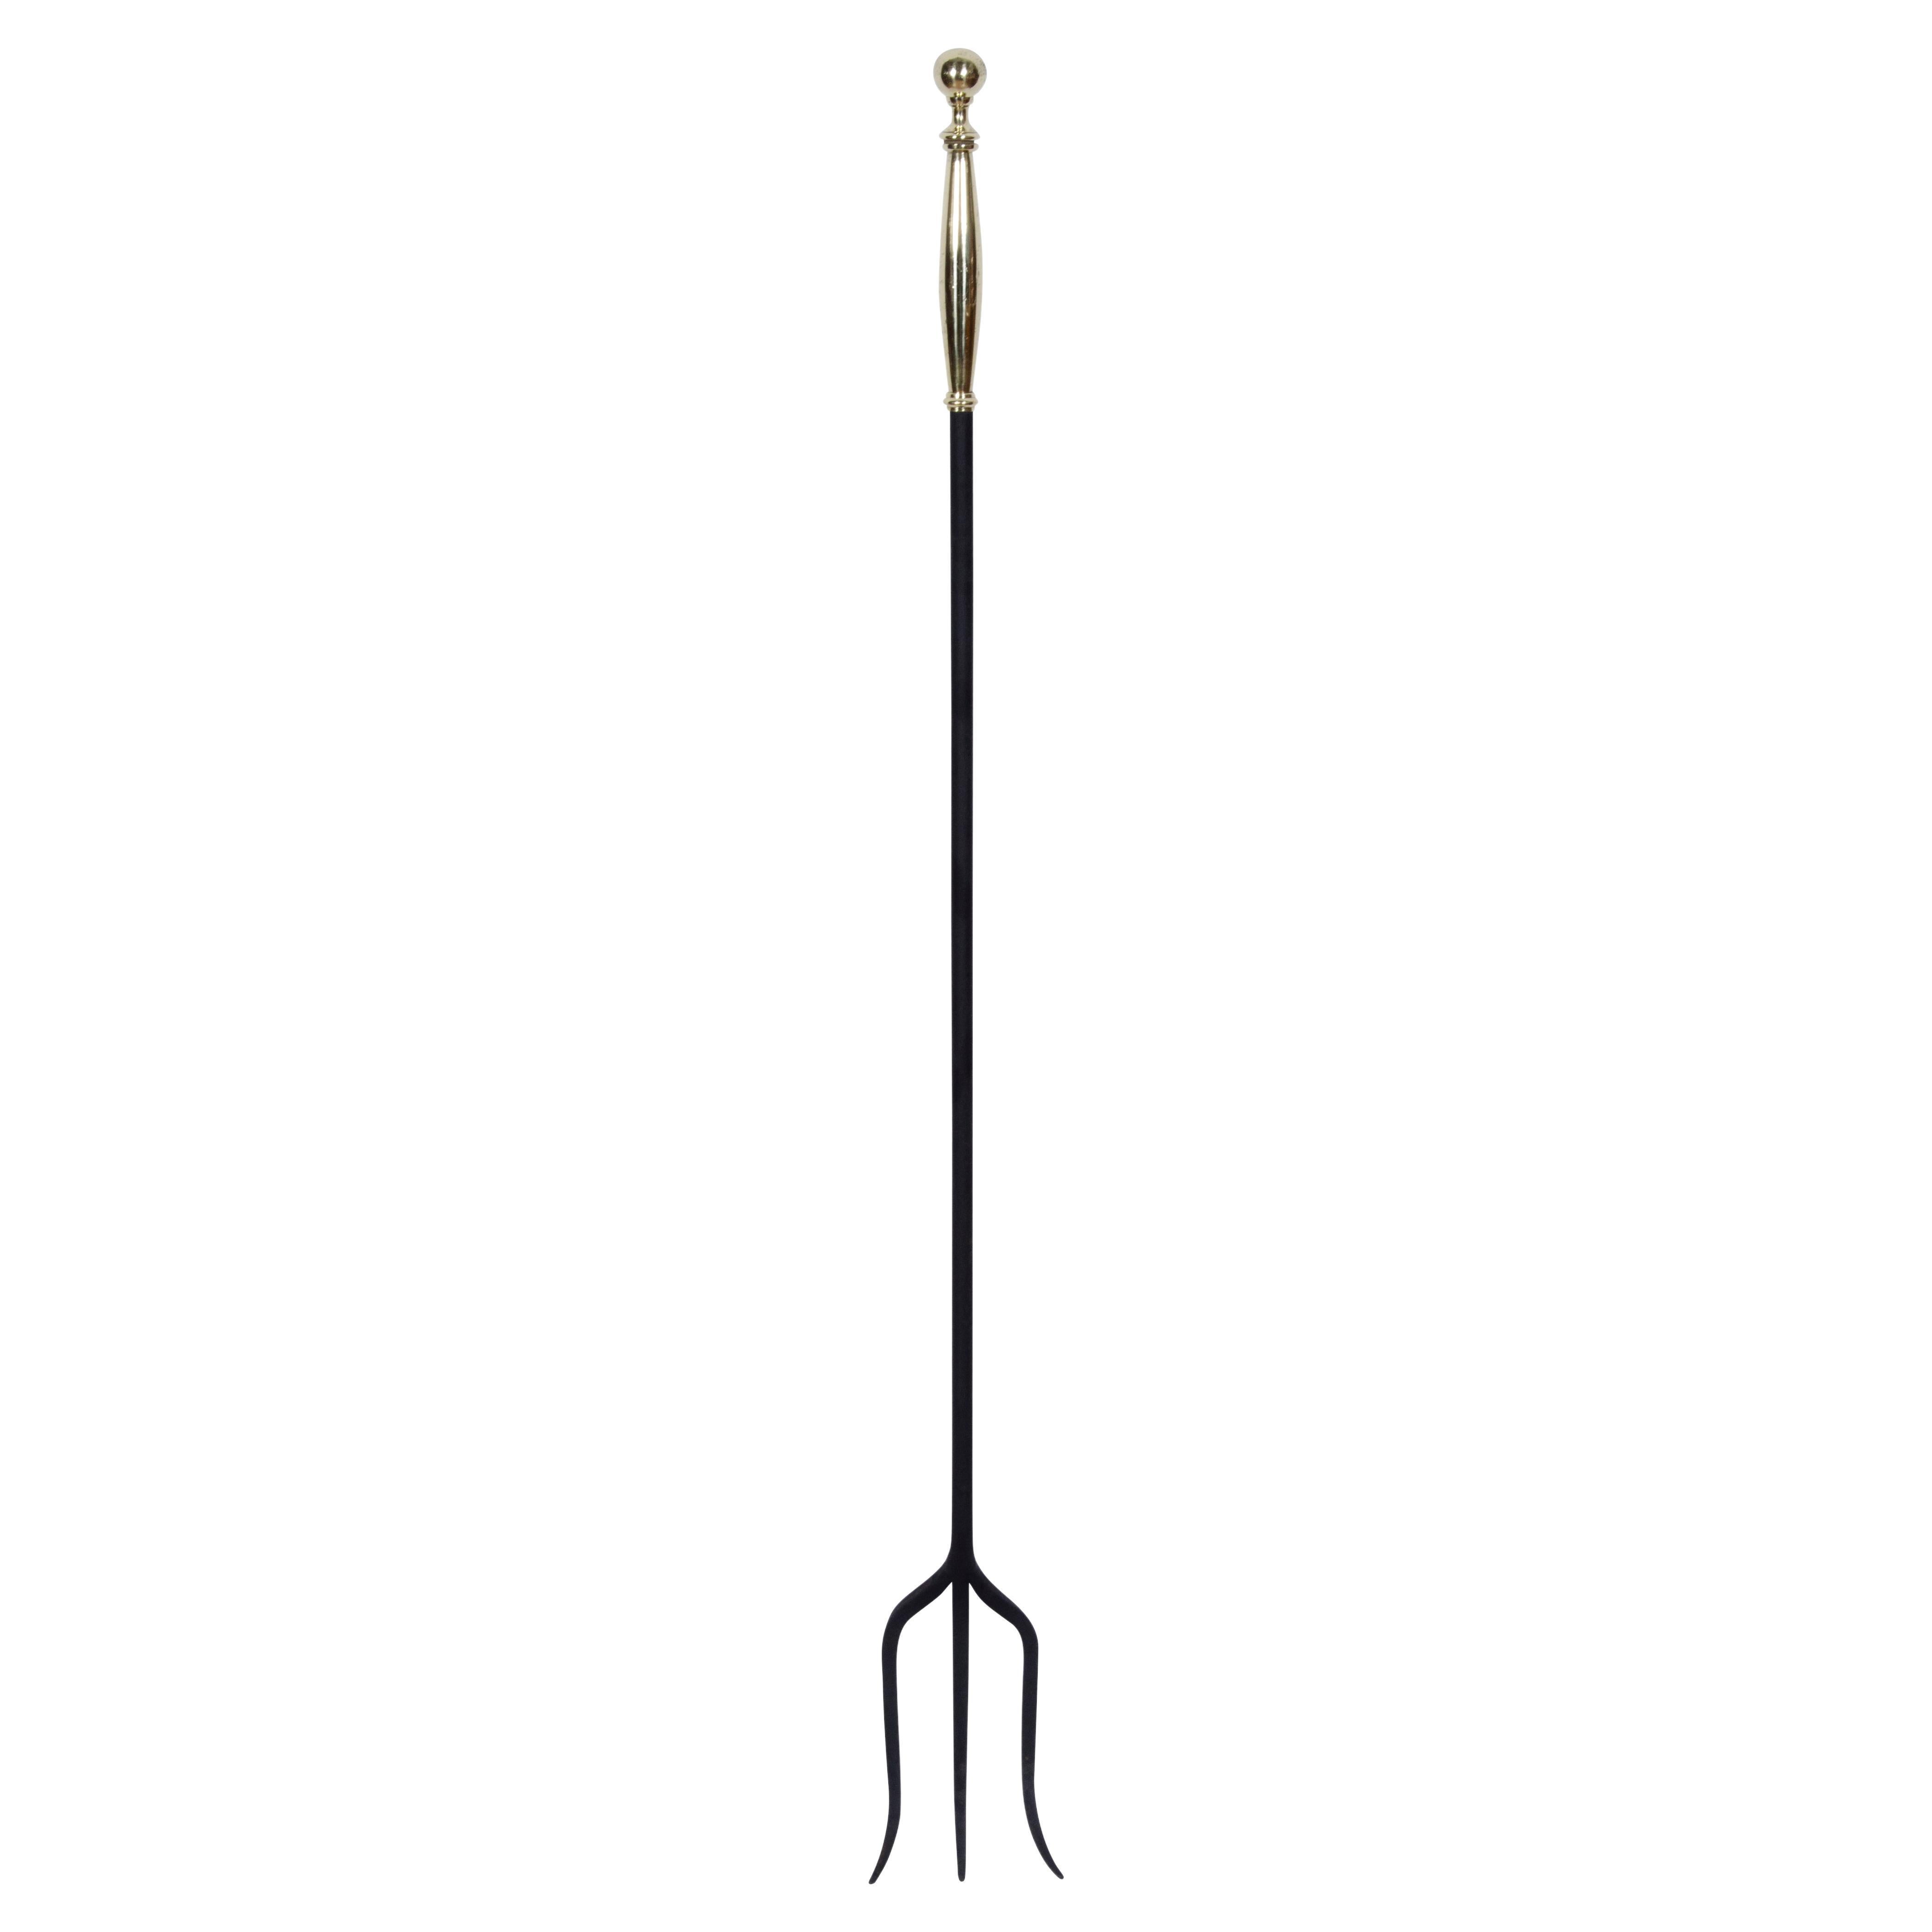 Brass and Wrought Iron Fireplace Fork